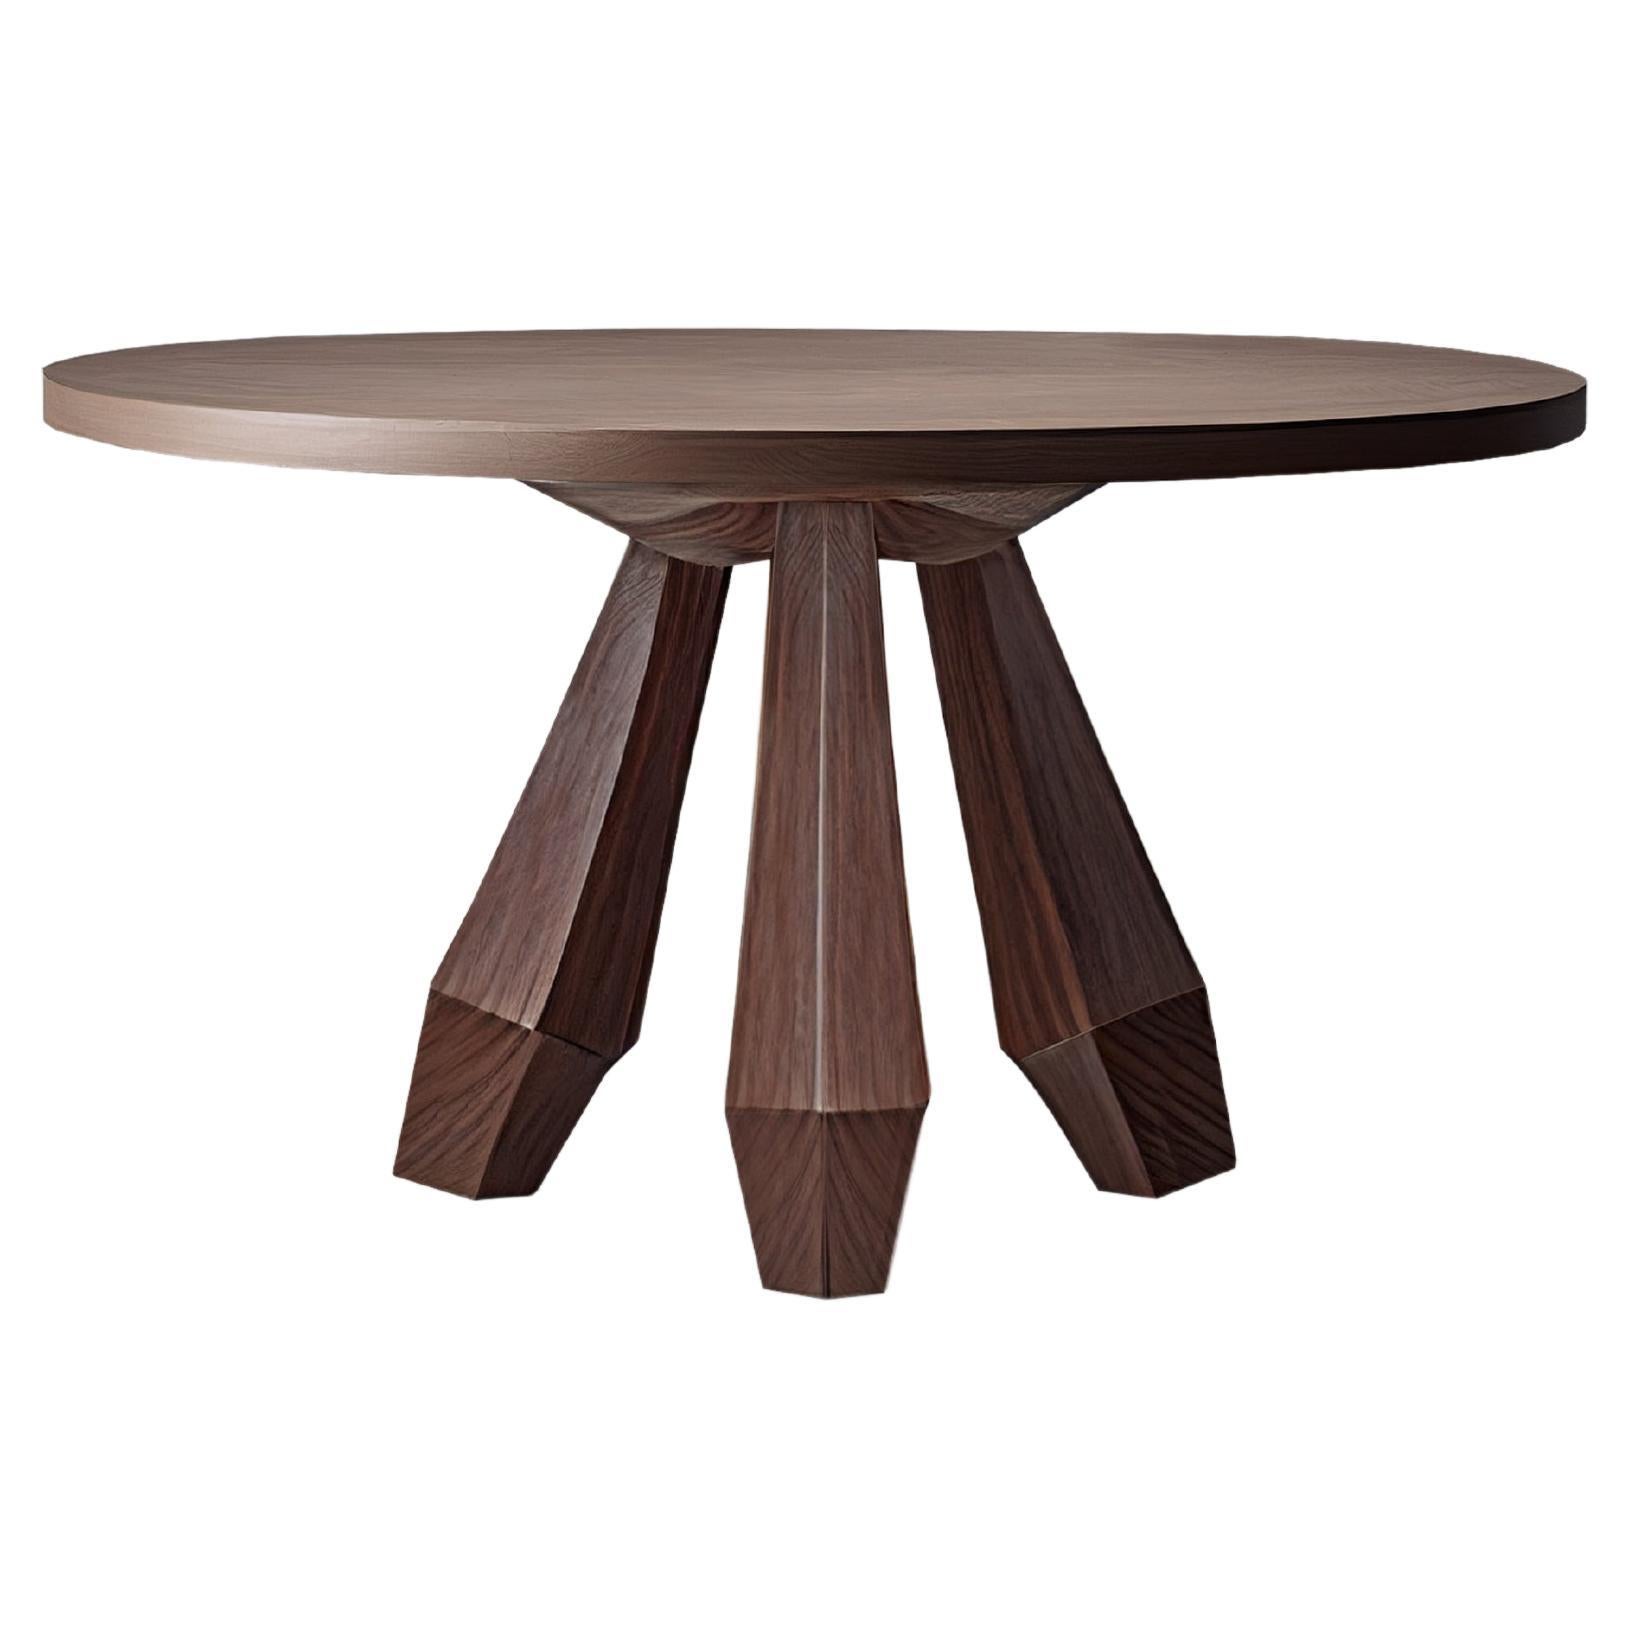 Dining Table Inspired by Charlotte Perriand's Sandoz Stool Design For Sale